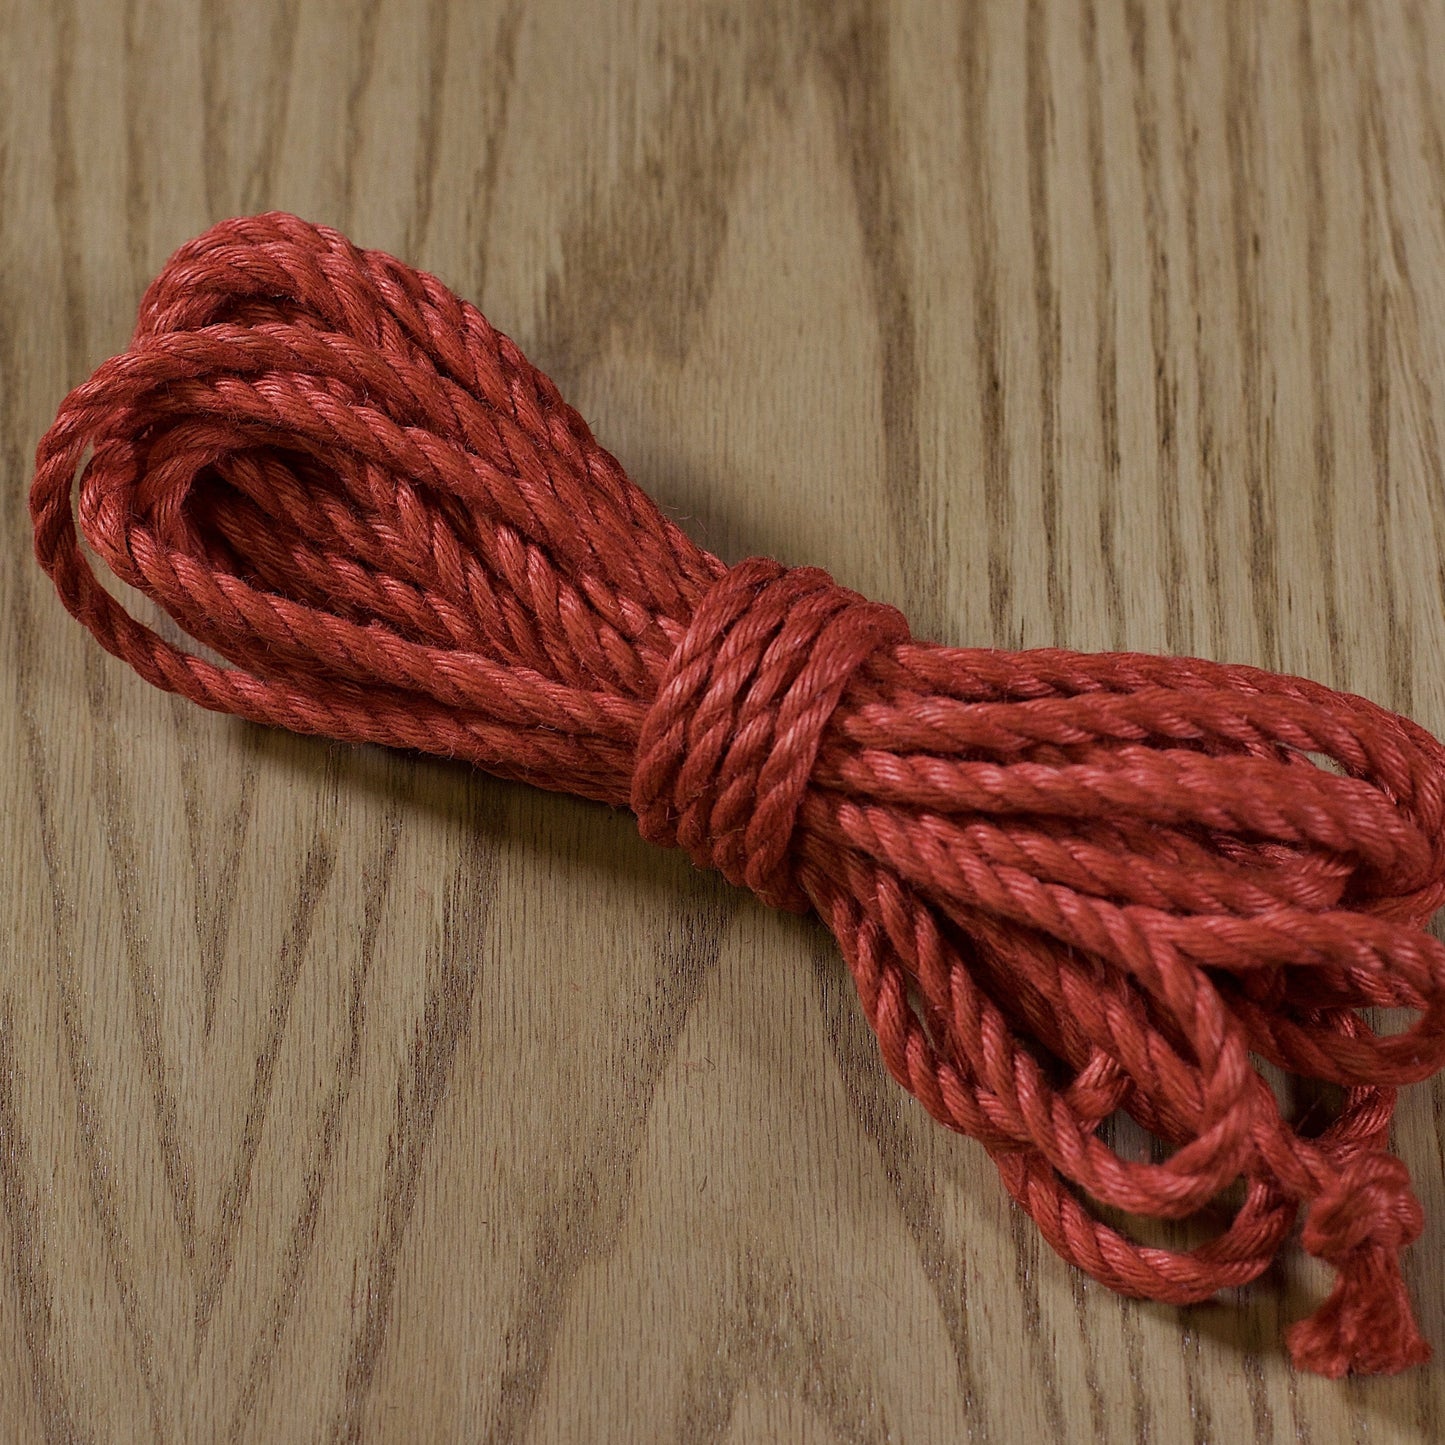 Jute rope Shibari quality by Tension - Red